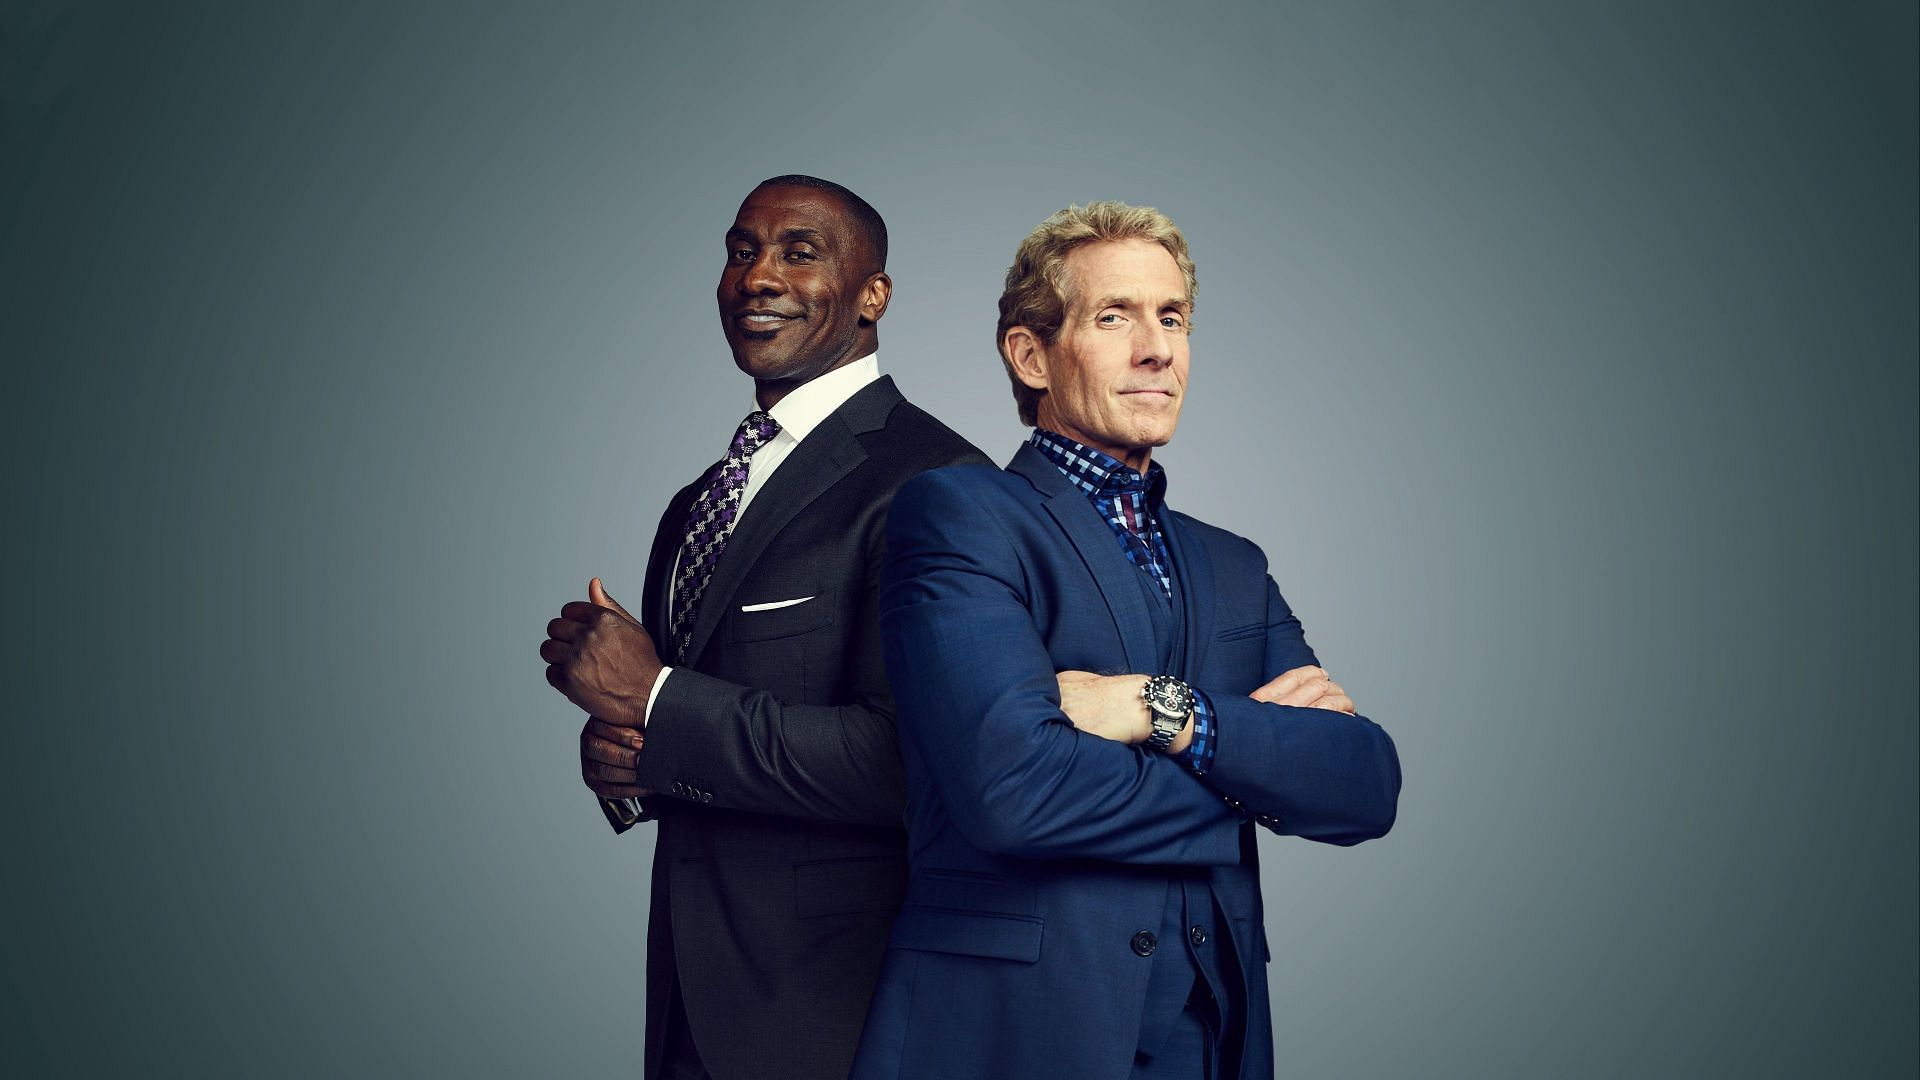 Skip Bayless and Shannon Sharpe are the hosts of Fox Sports&#039; &#039;Undisputed&#039;